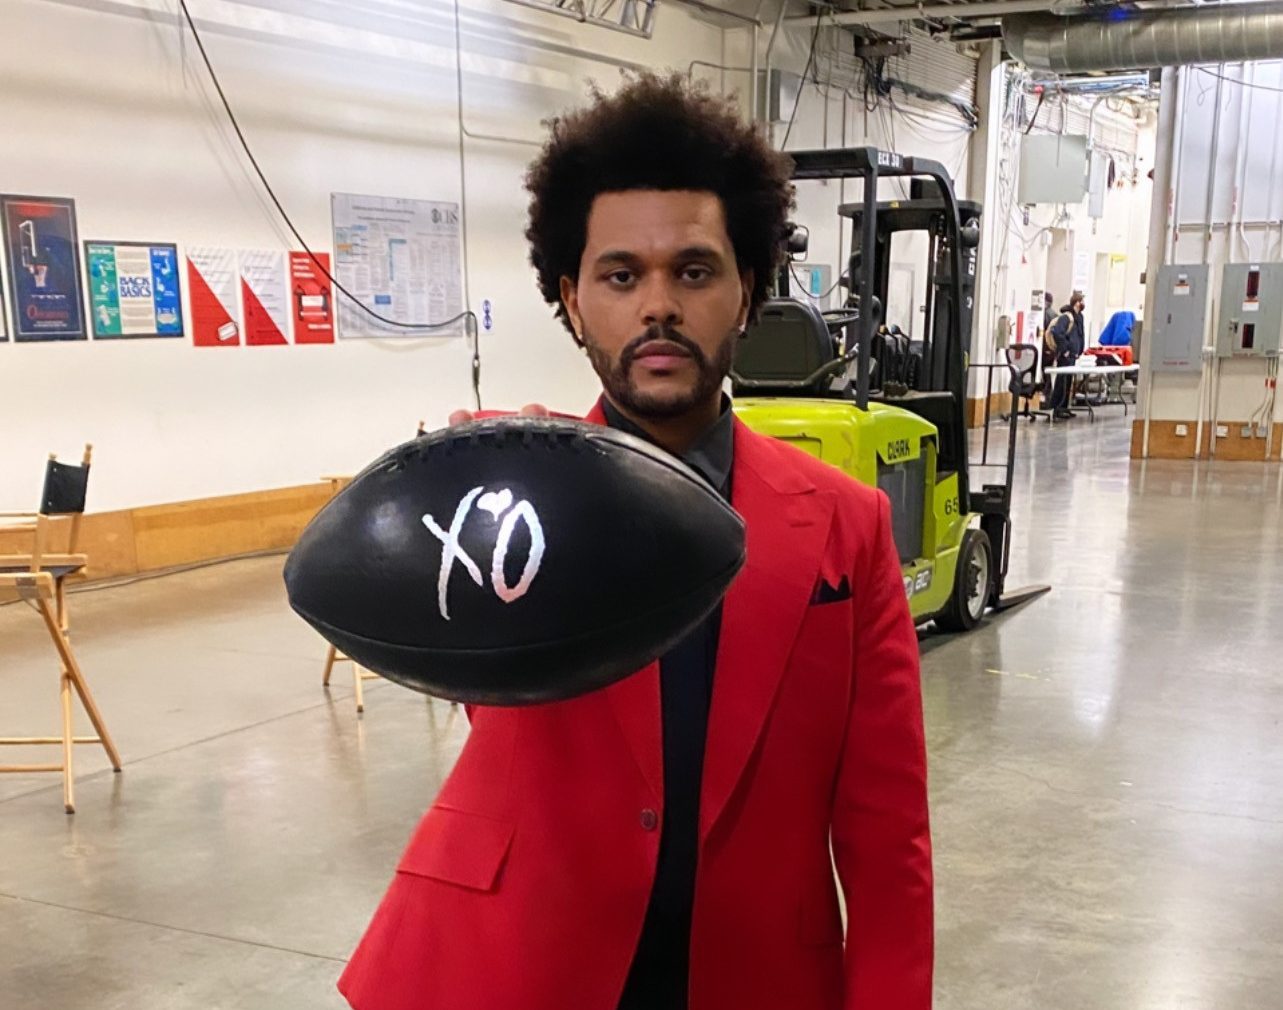 Wilson Drops Restricted-Edition Trim Bowl Soccer Collaboration With The Weeknd